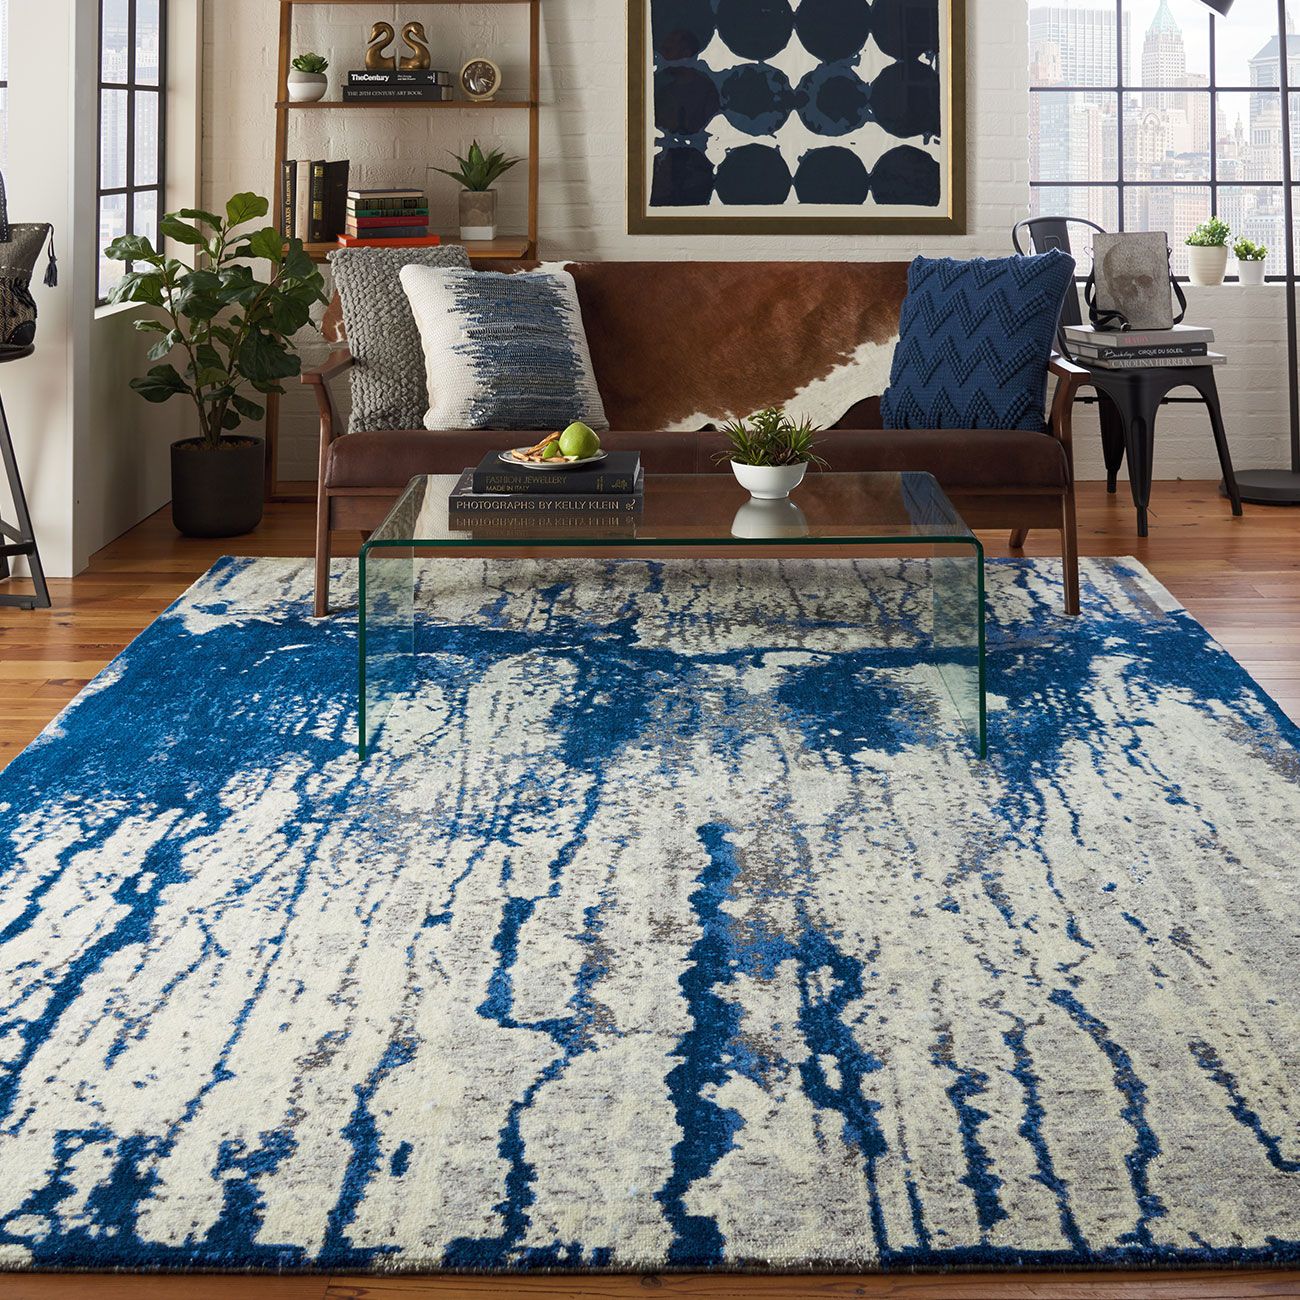 Top Five Rugs to Revitalize Your Living Room